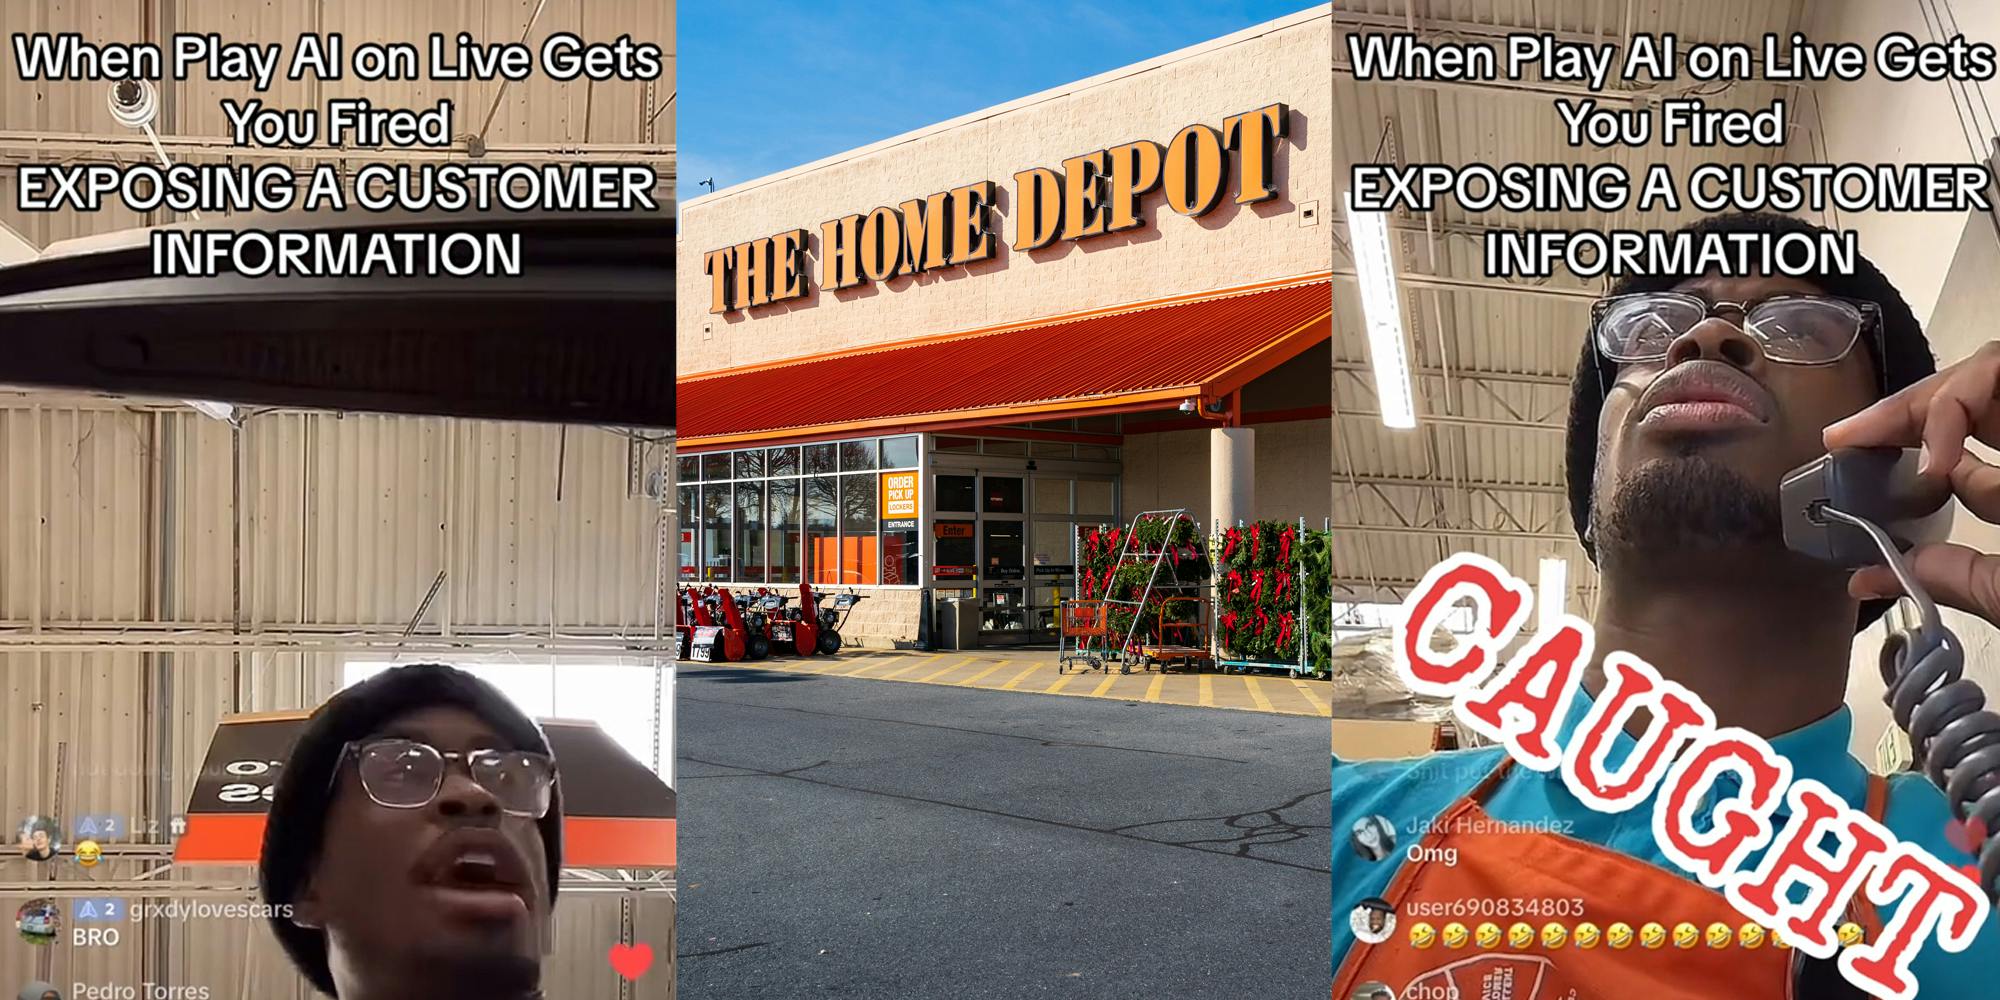 Home Depot worker on Instagram live with caption "When Play AI on Live Gets You Fired EXPOSING A CUSTOMER INFORMATION" (l) Home Depot building with sign (c) Home Depot worker on Instagram live with caption "When Play AI on Live Gets You Fired EXPOSING A CUSTOMER INFORMATION" "CAUGHT" (r)